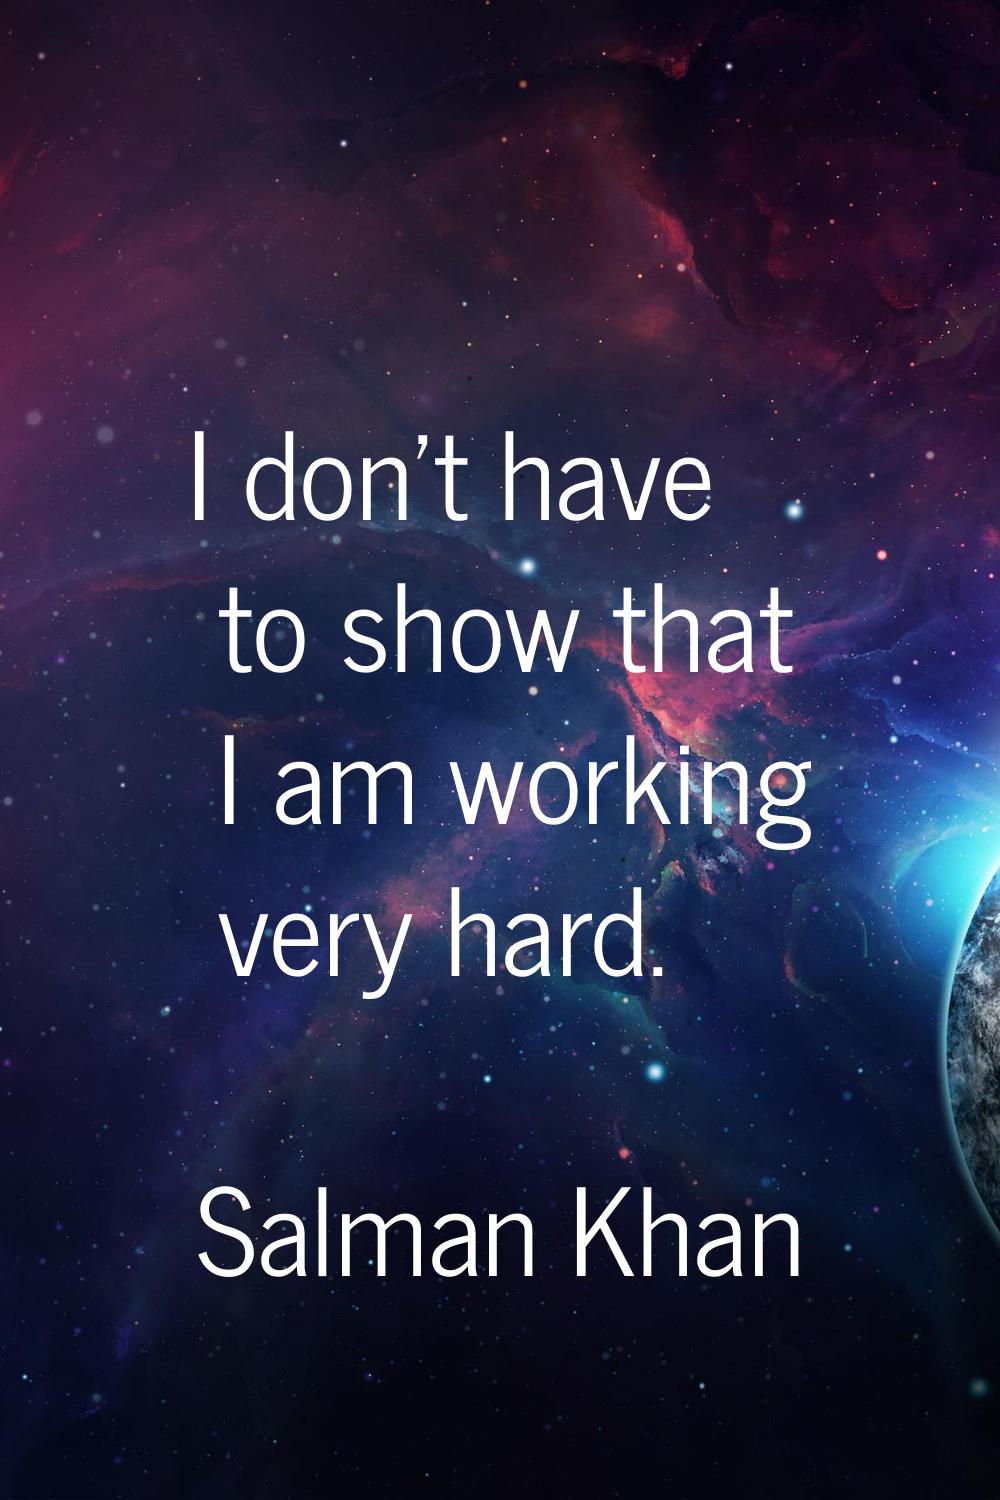 I don't have to show that I am working very hard.